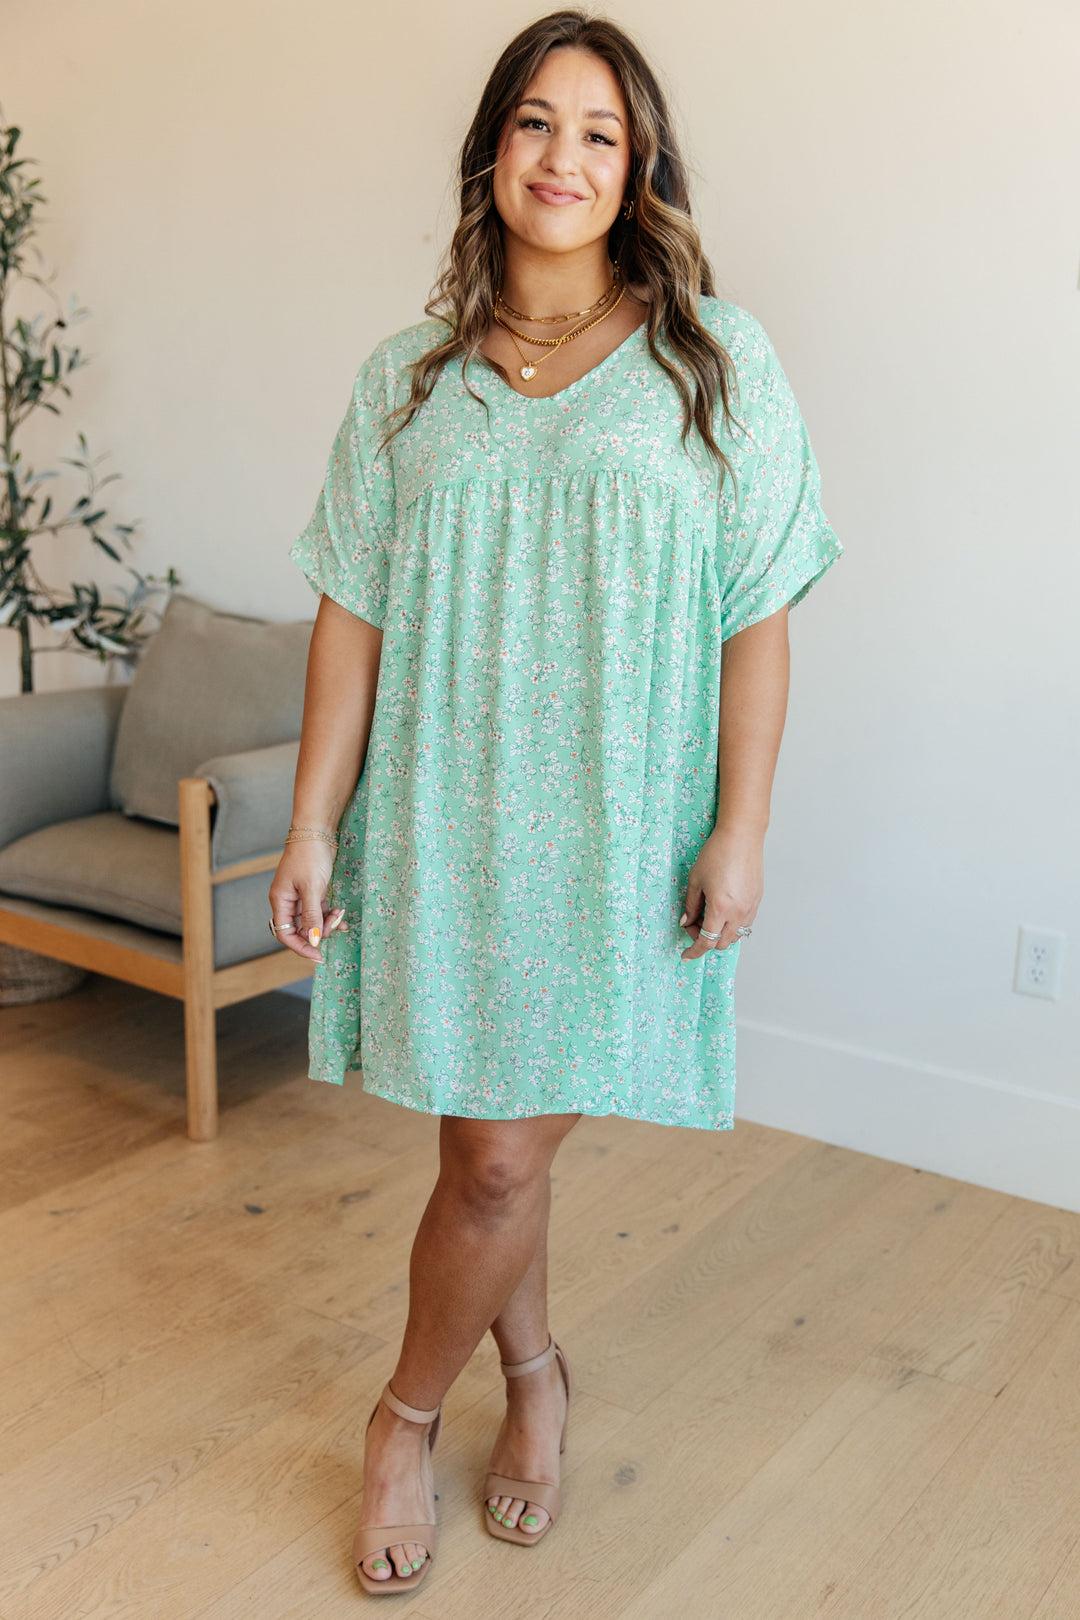 Rodeo Lights Dolman Sleeve Dress in Mint Floral-Dresses-Inspired by Justeen-Women's Clothing Boutique in Chicago, Illinois